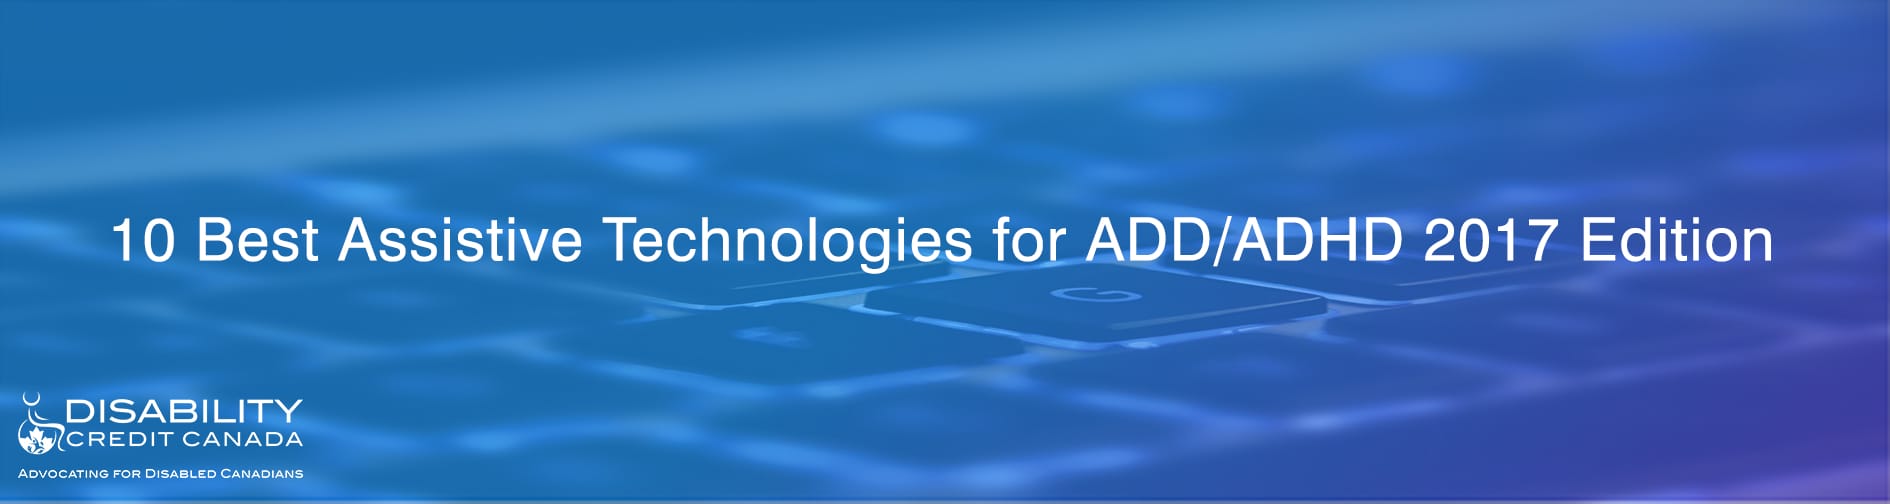 10 Best Assistive Technologies for ADD/ADHD 